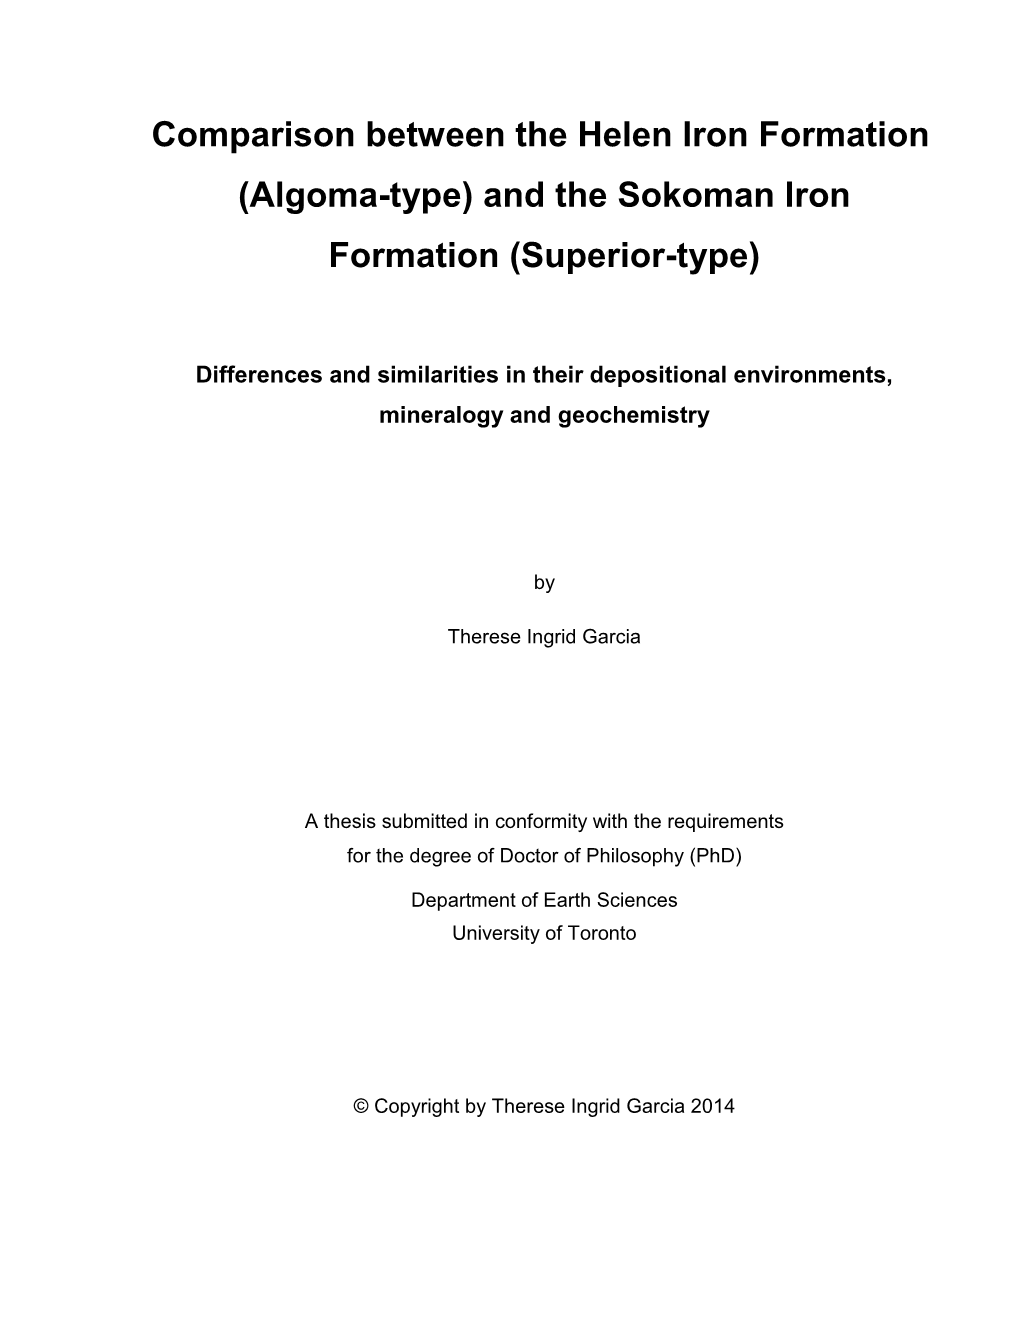 Comparison Between the Helen Iron Formation (Algoma-Type) and the Sokoman Iron Formation (Superior-Type)